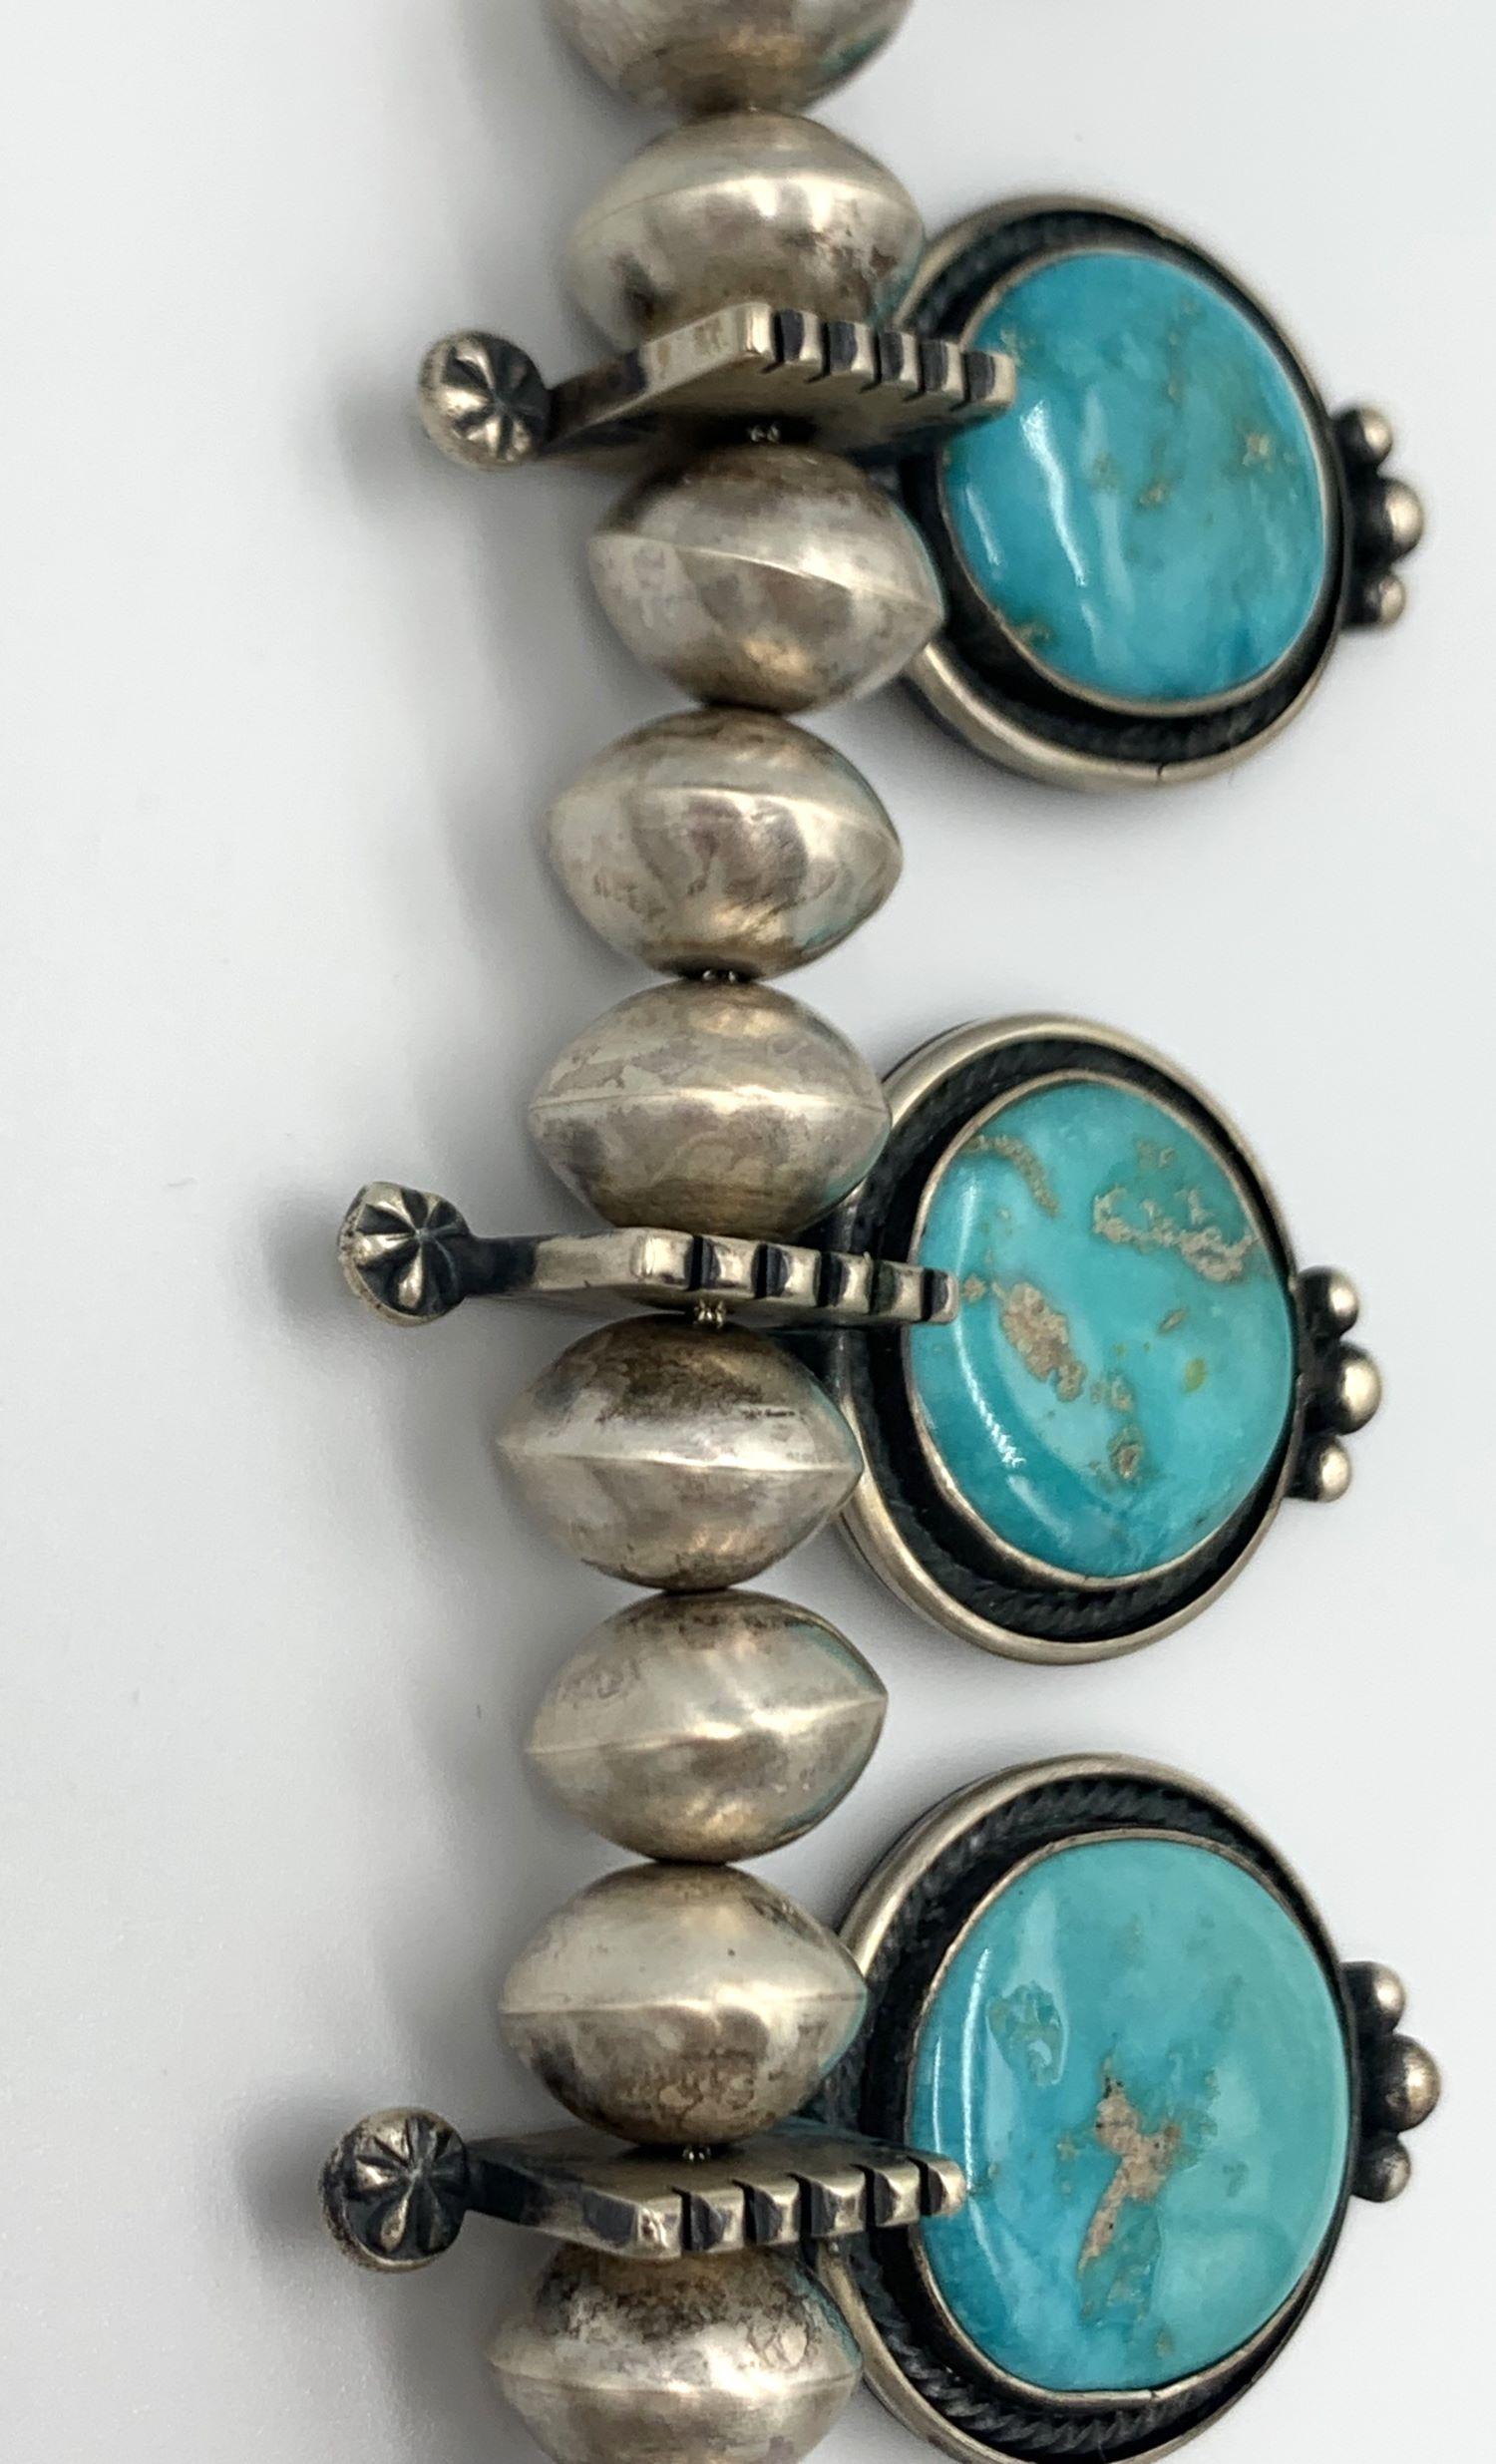 Women's or Men's Squash Blossom Necklace Earrings Set by Navajo Silversmith Tommy Jackson For Sale